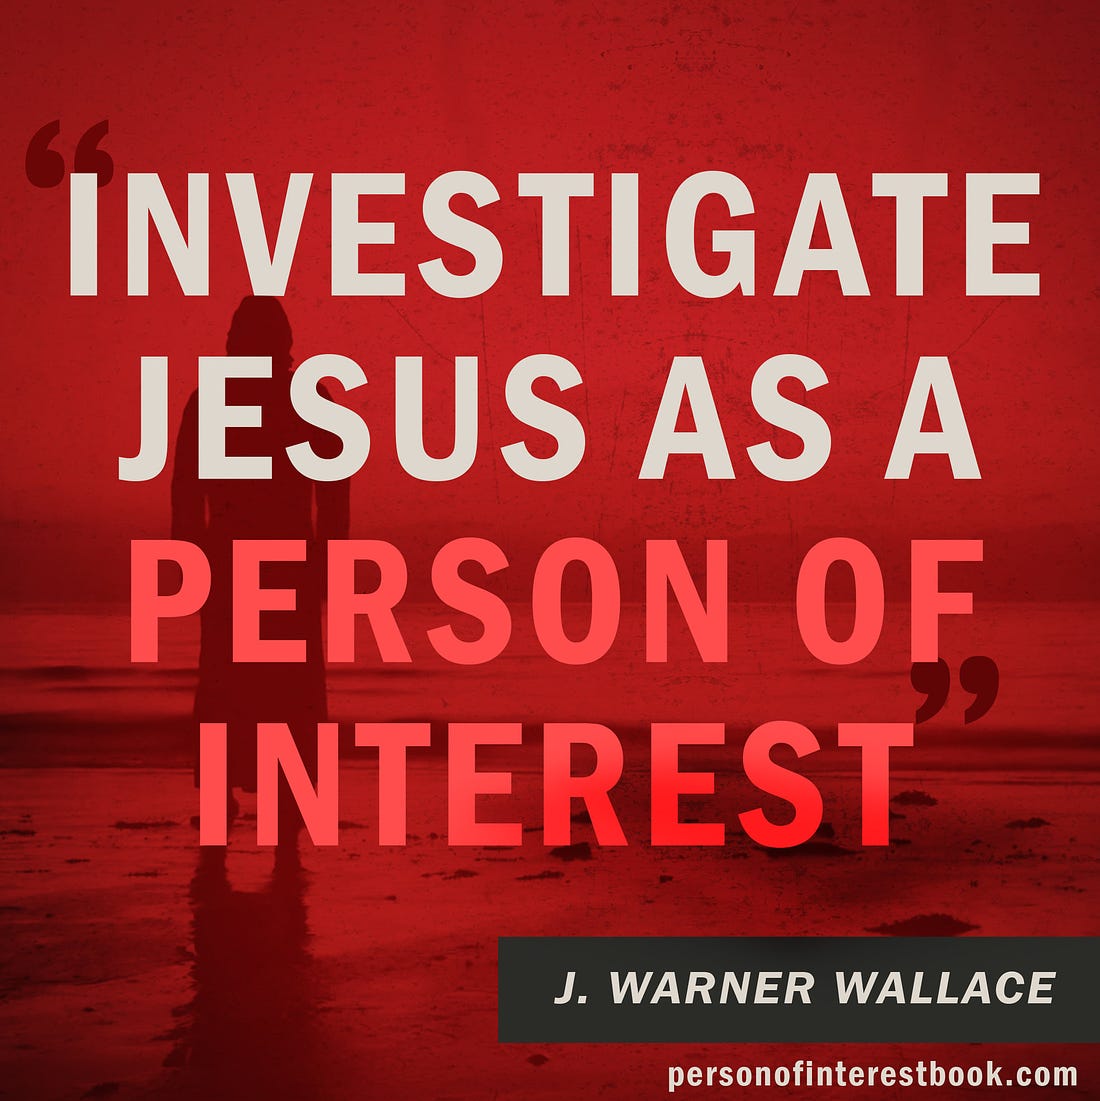 Image  saying "Investigate Jesus as a person of interest.